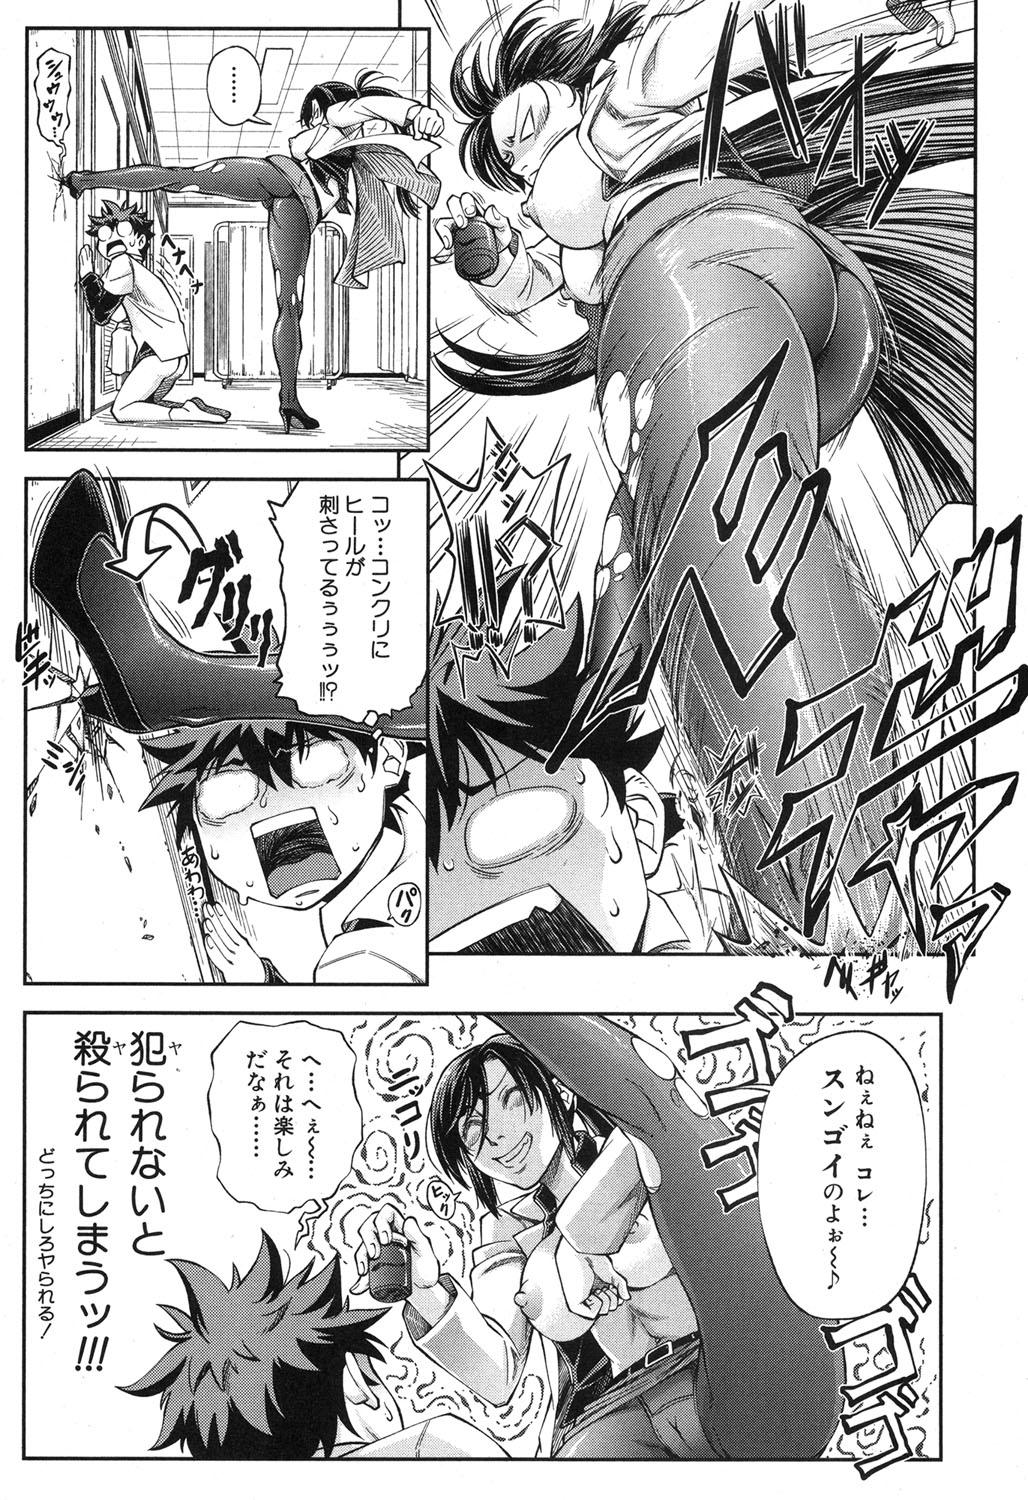 BUSTER COMIC 2015-11 11